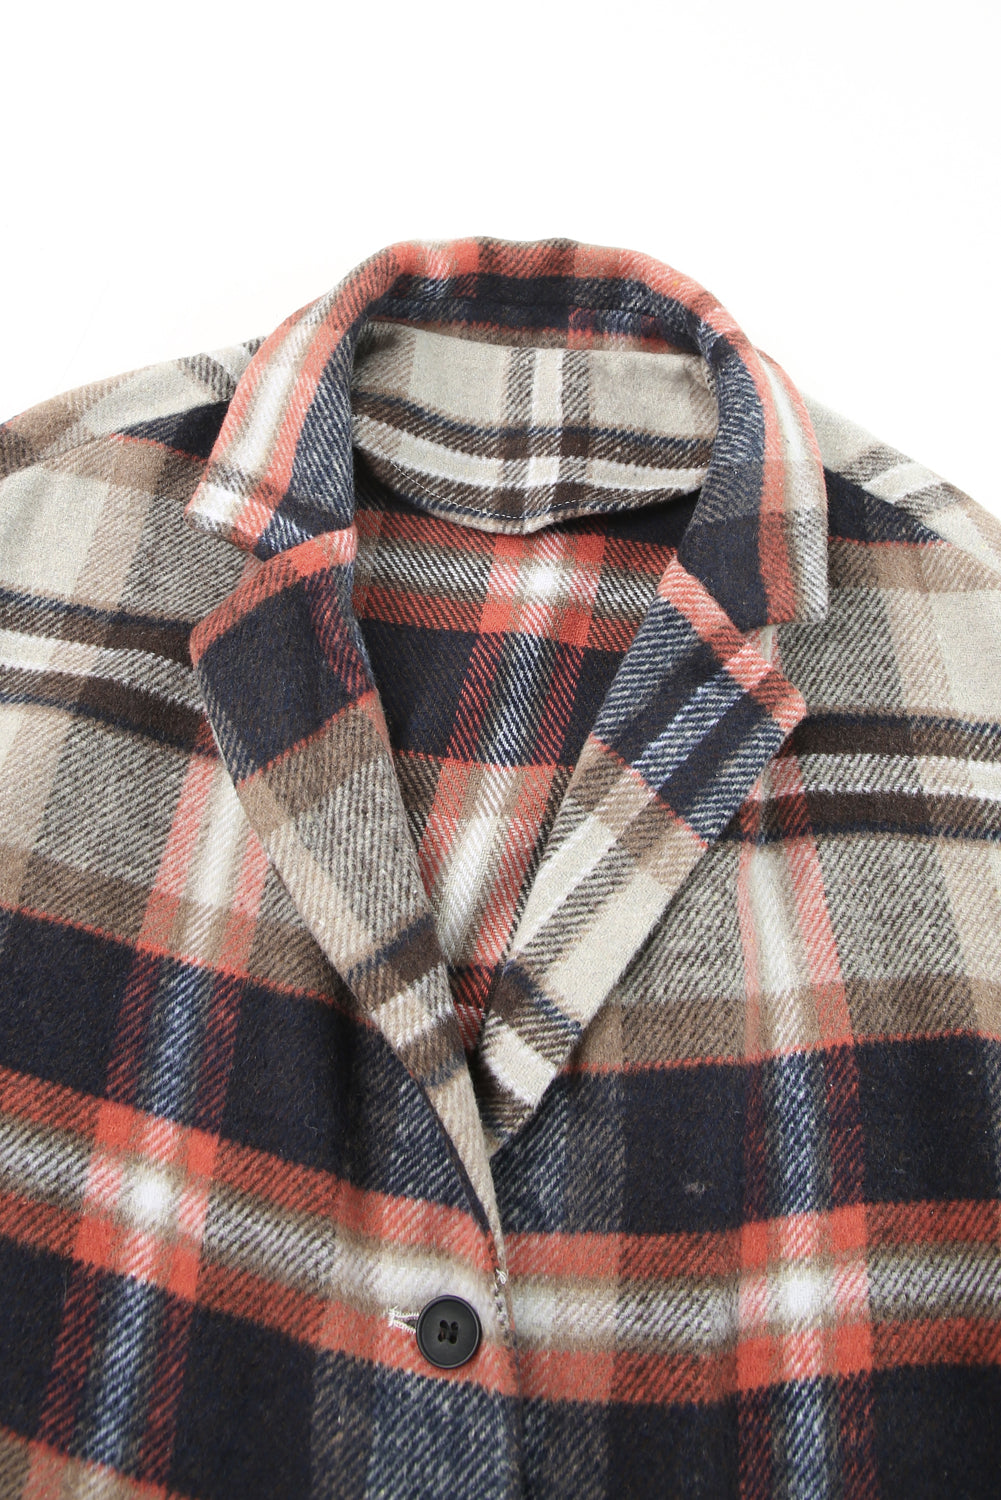 Fiery Red Plaid Button Up Lapel Jacket